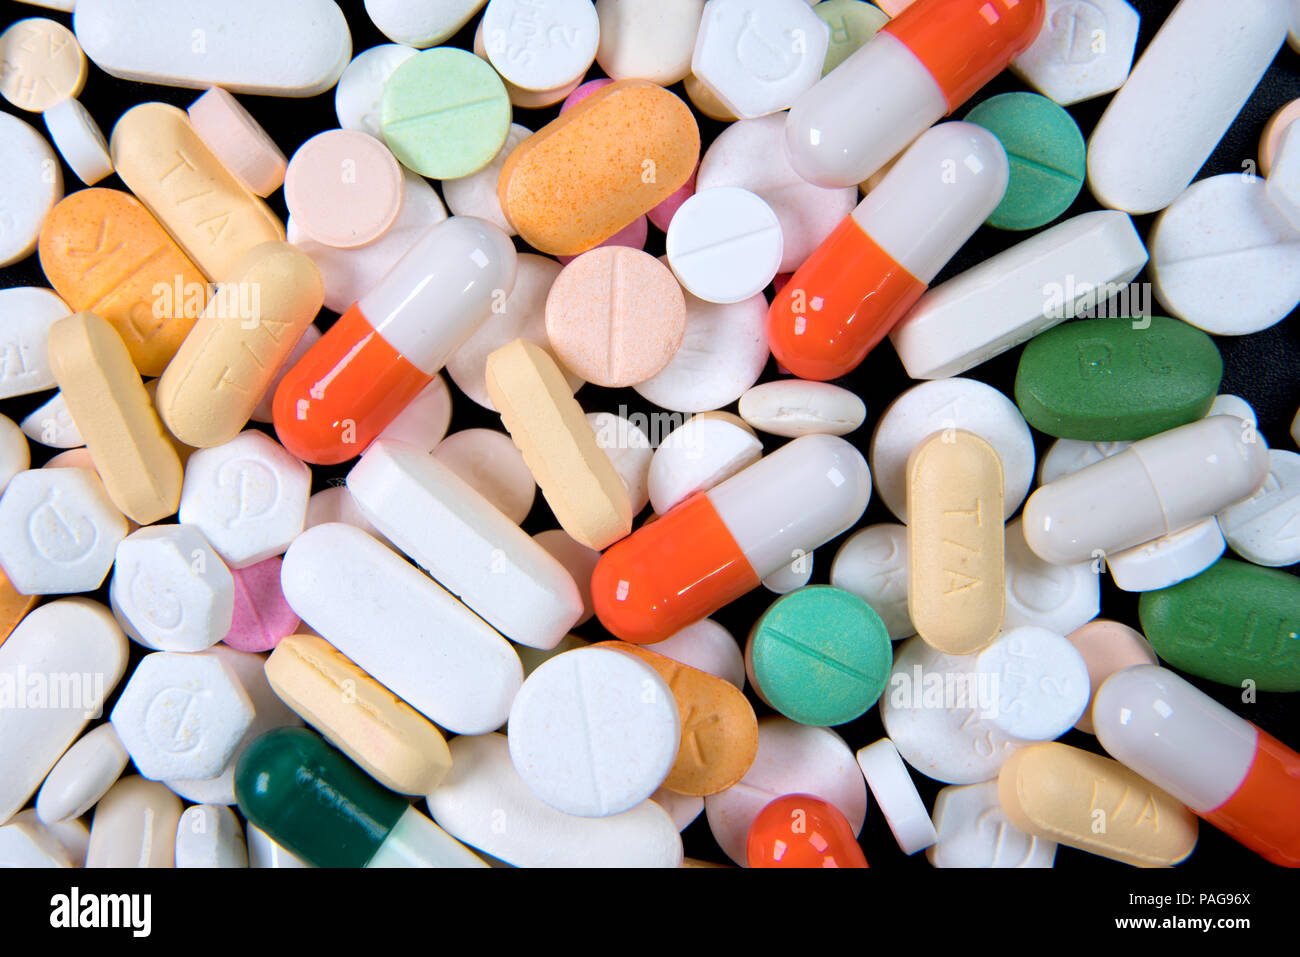 A top view of a heap of colourful medicine pills and capsules Stock Photo